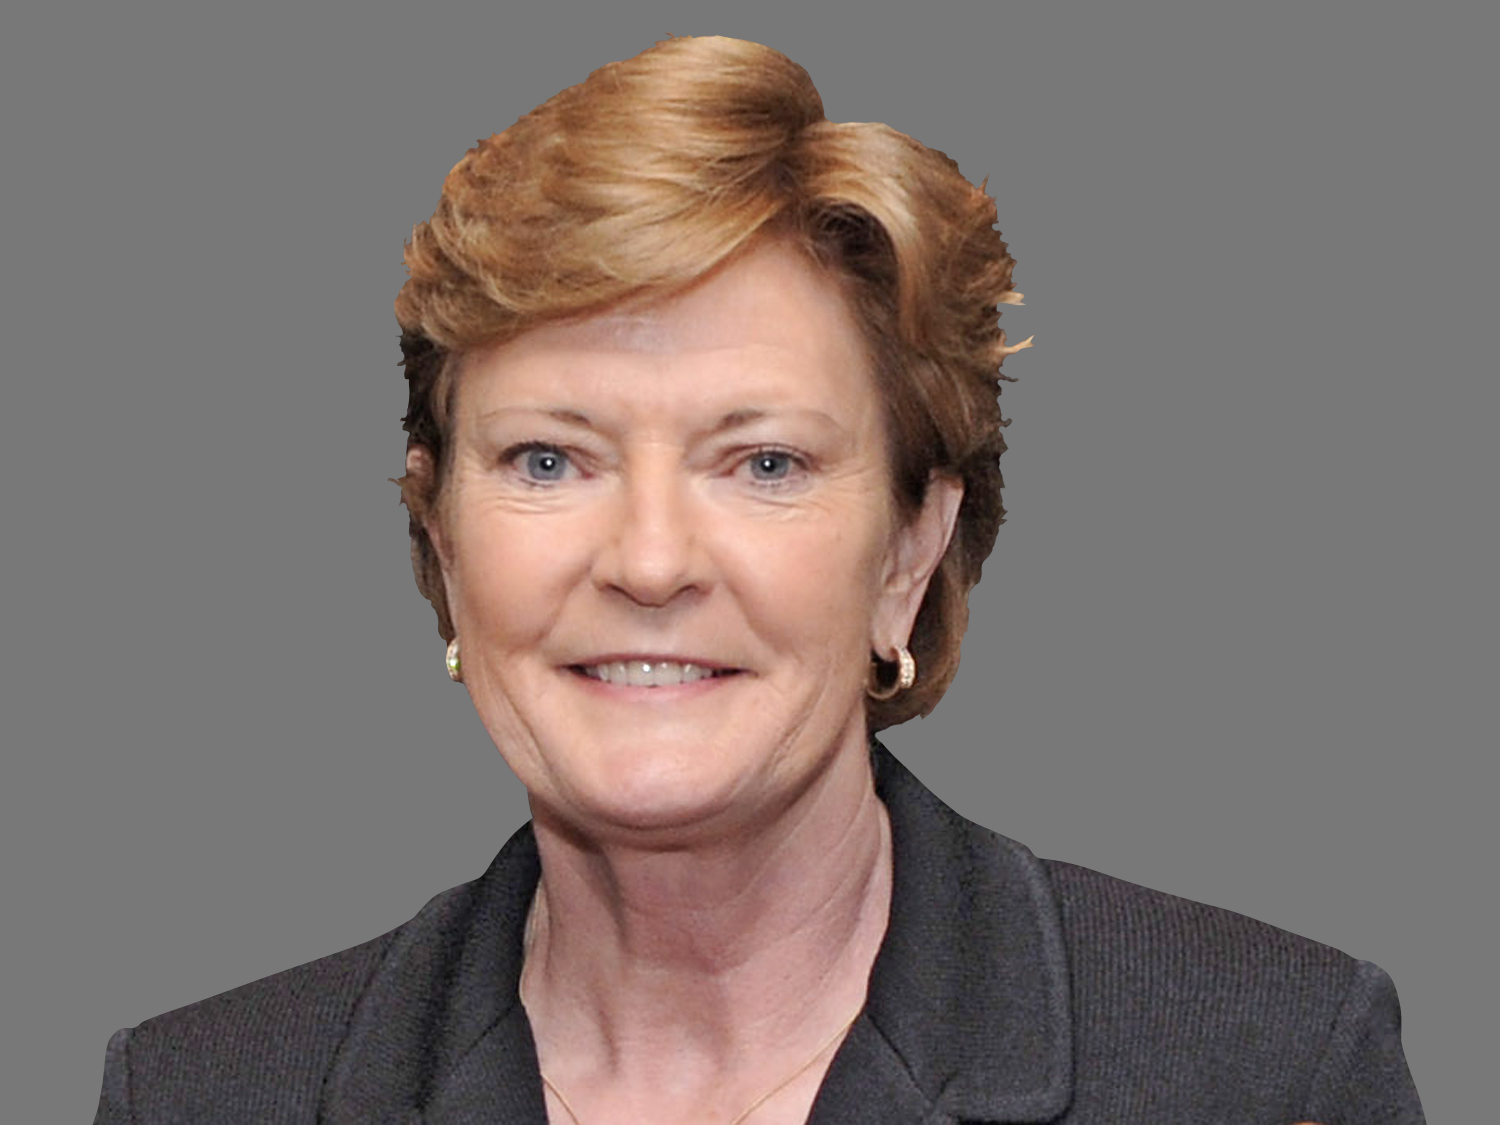 Pat Summitt released from hospital after routine tests | wbir.com